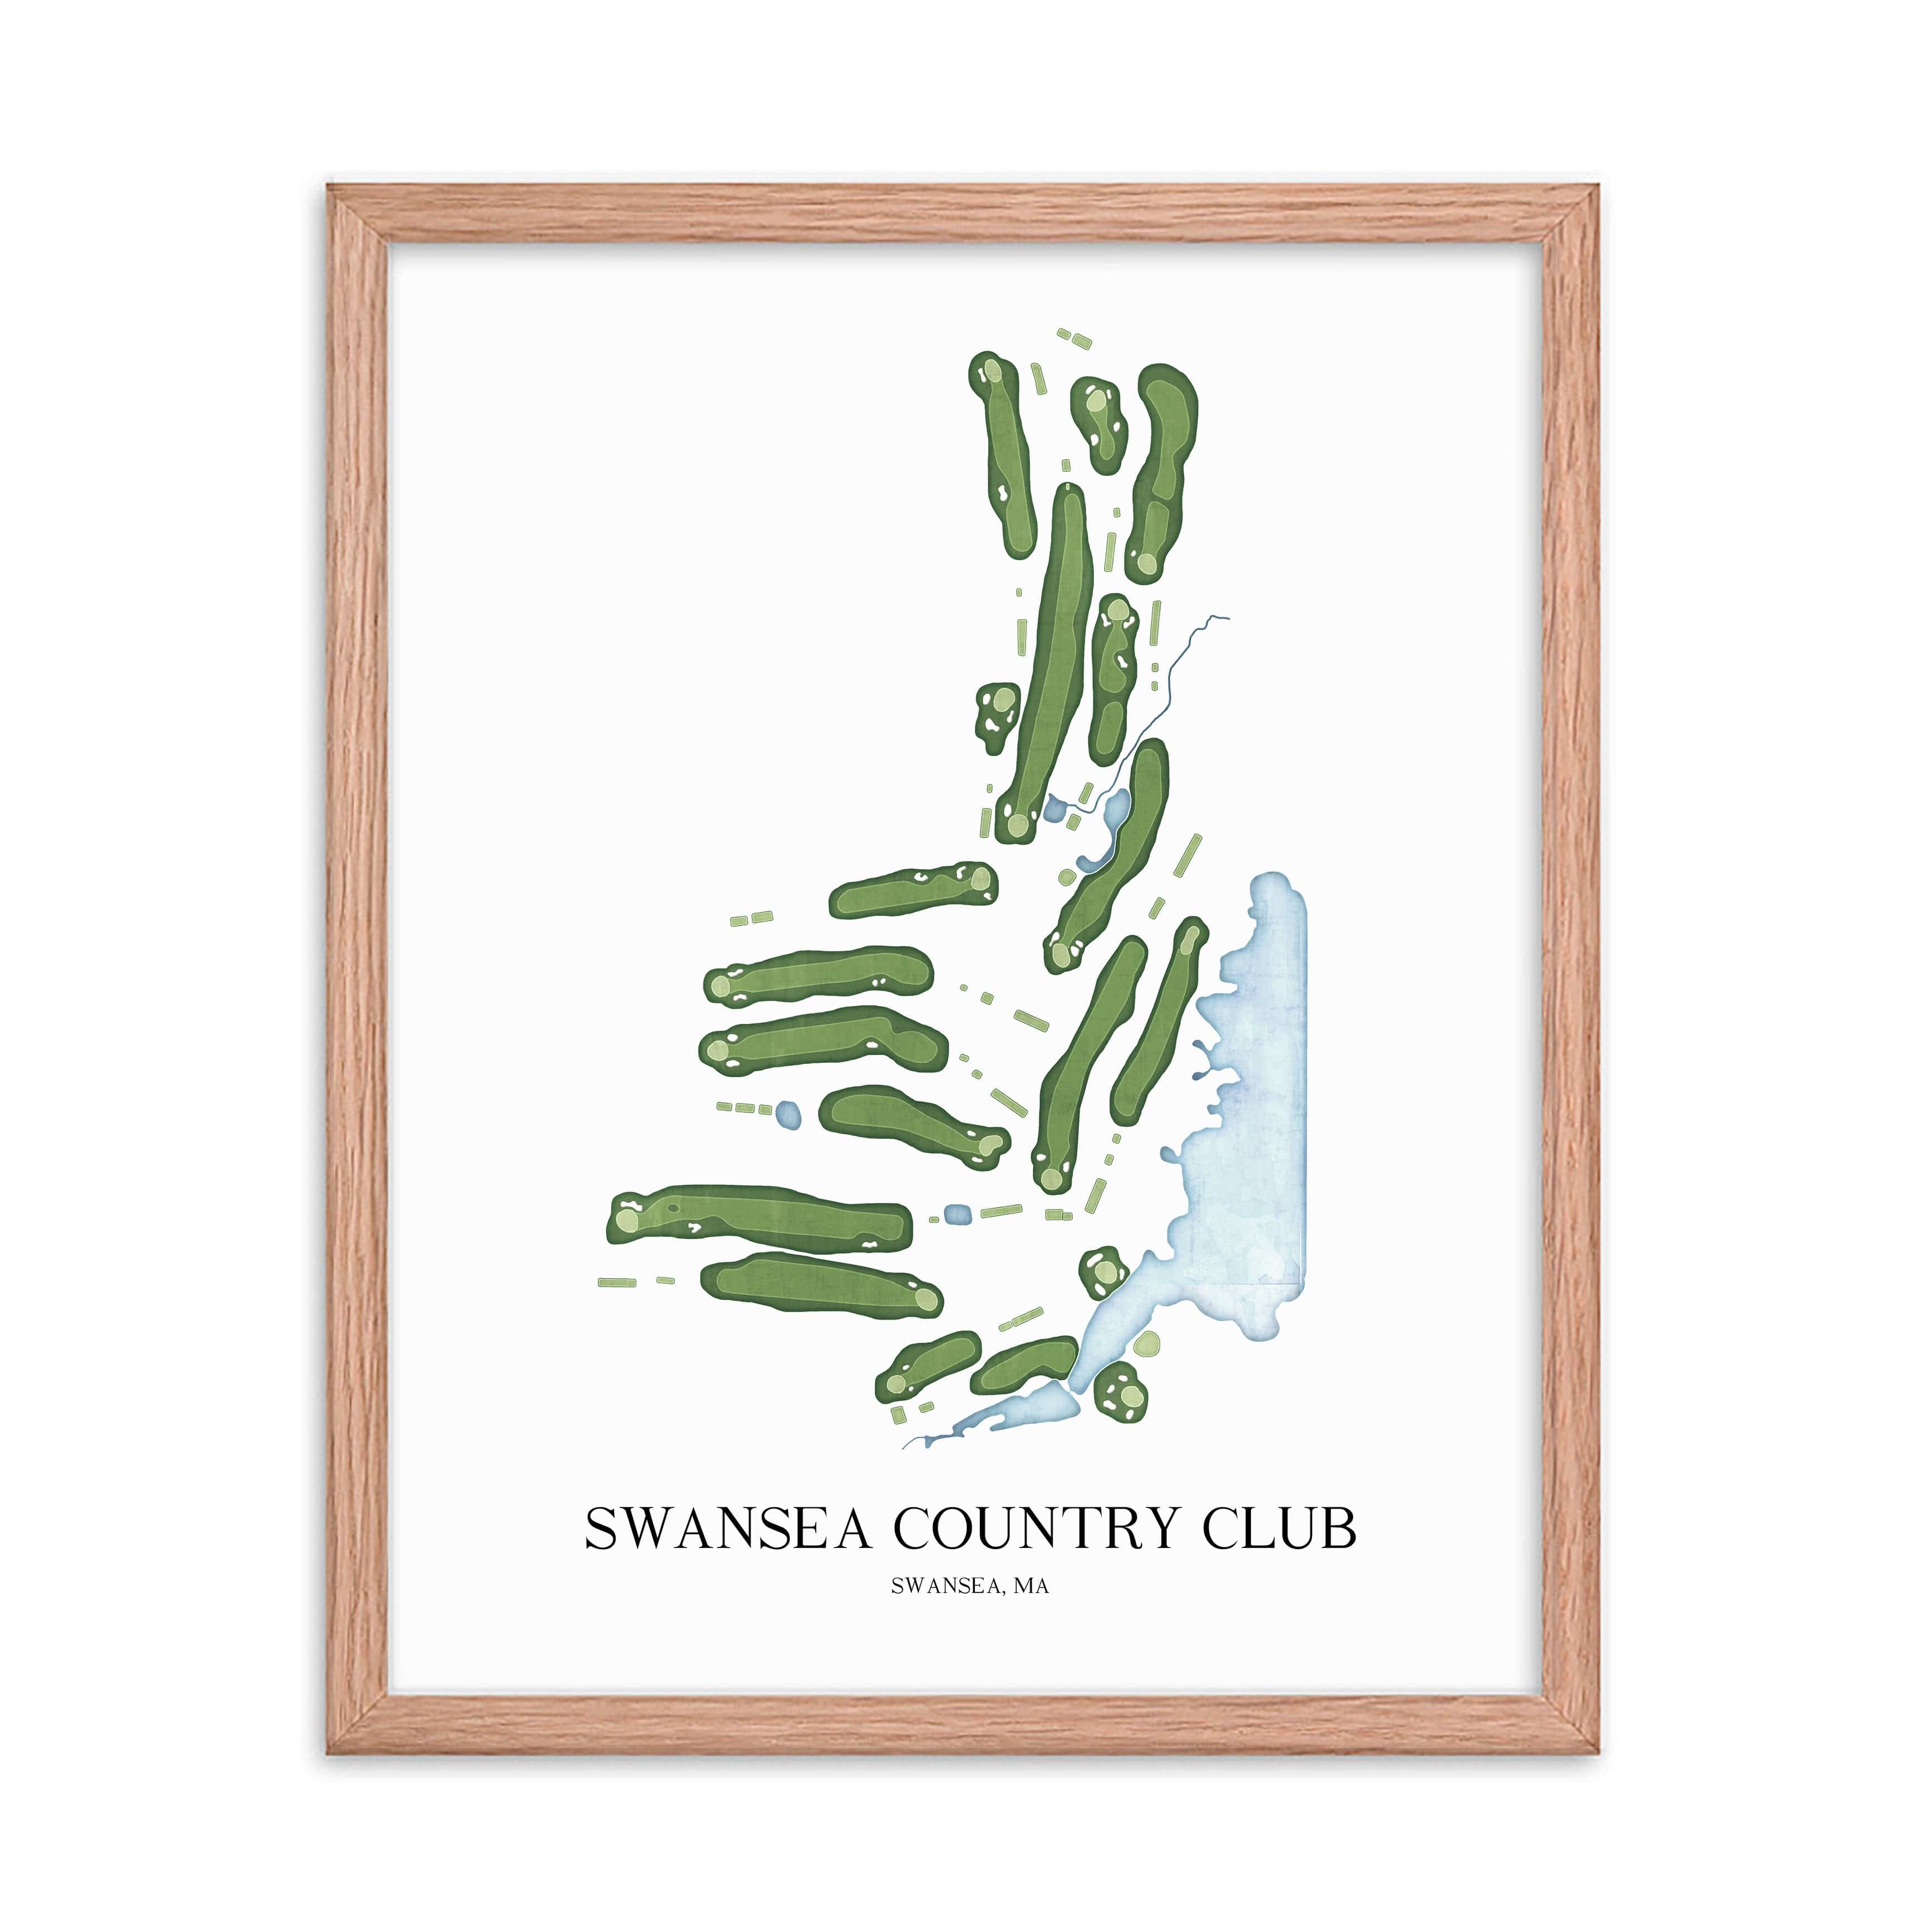 The 19th Hole Golf Shop - Golf Course Prints -  Swansea Country Club Golf Course Map